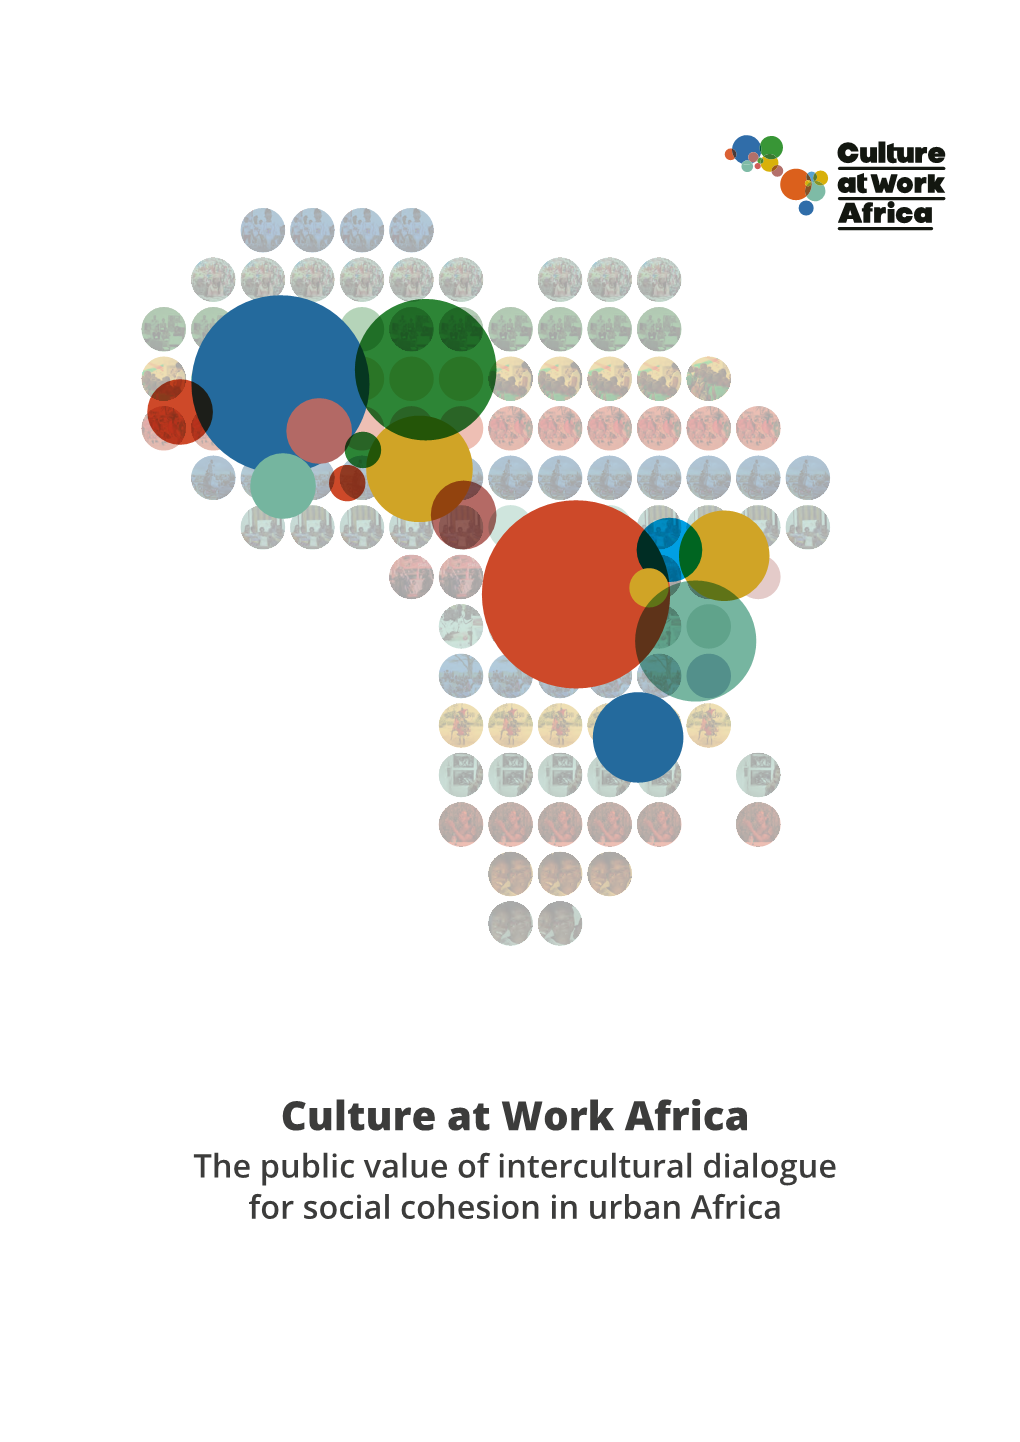 The Publication – Culture at Work